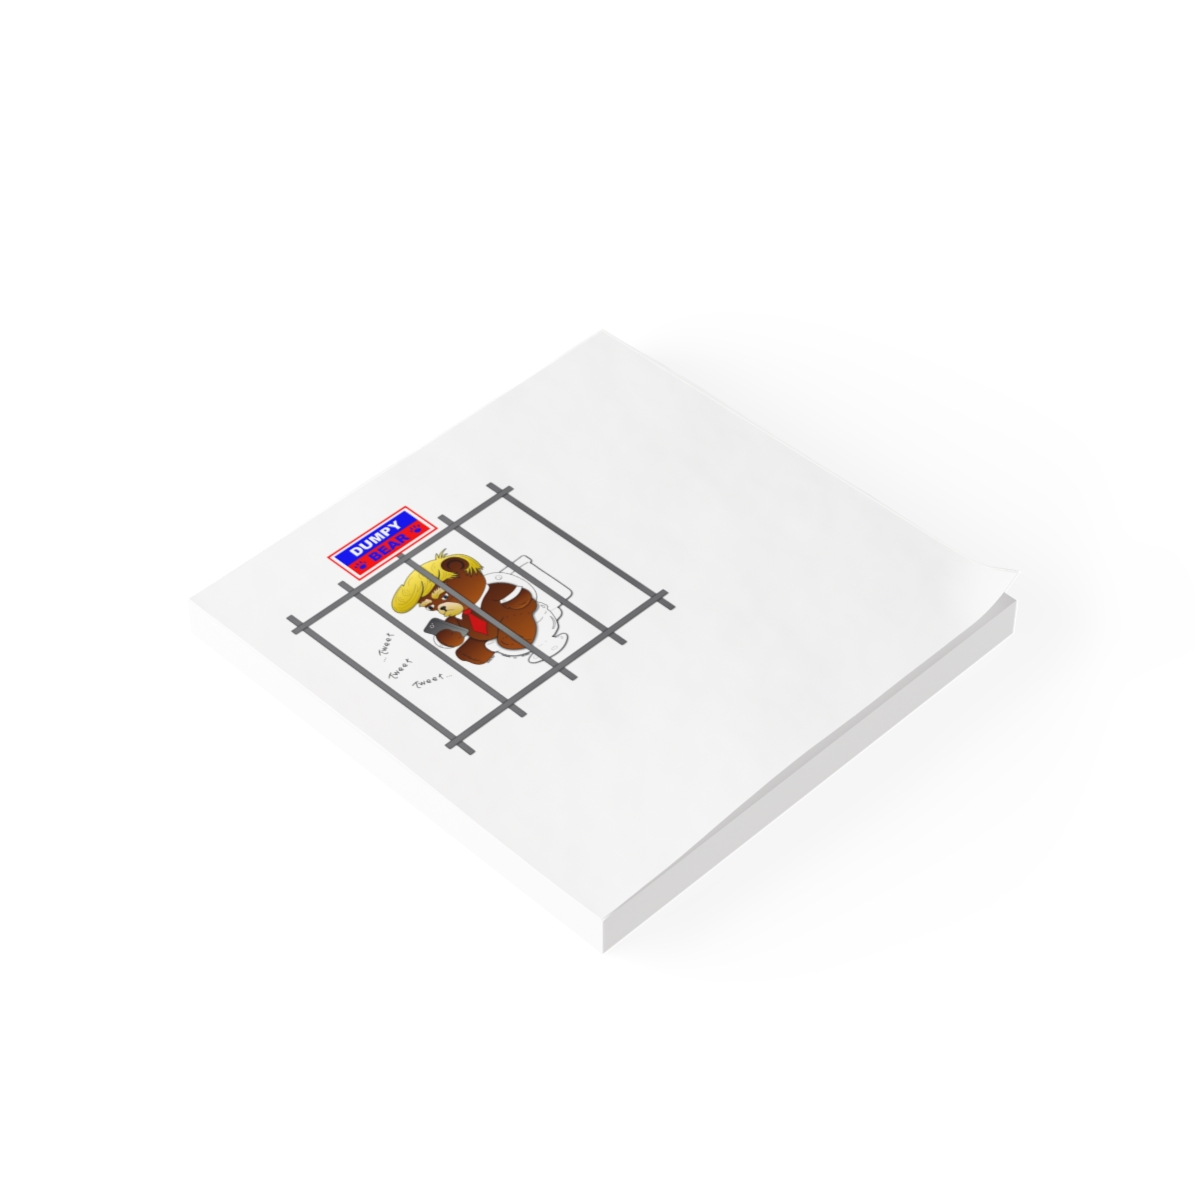 Dumpy Bear Tweeting on Toilet Behind Bars - Post-it® Note Pads product thumbnail image